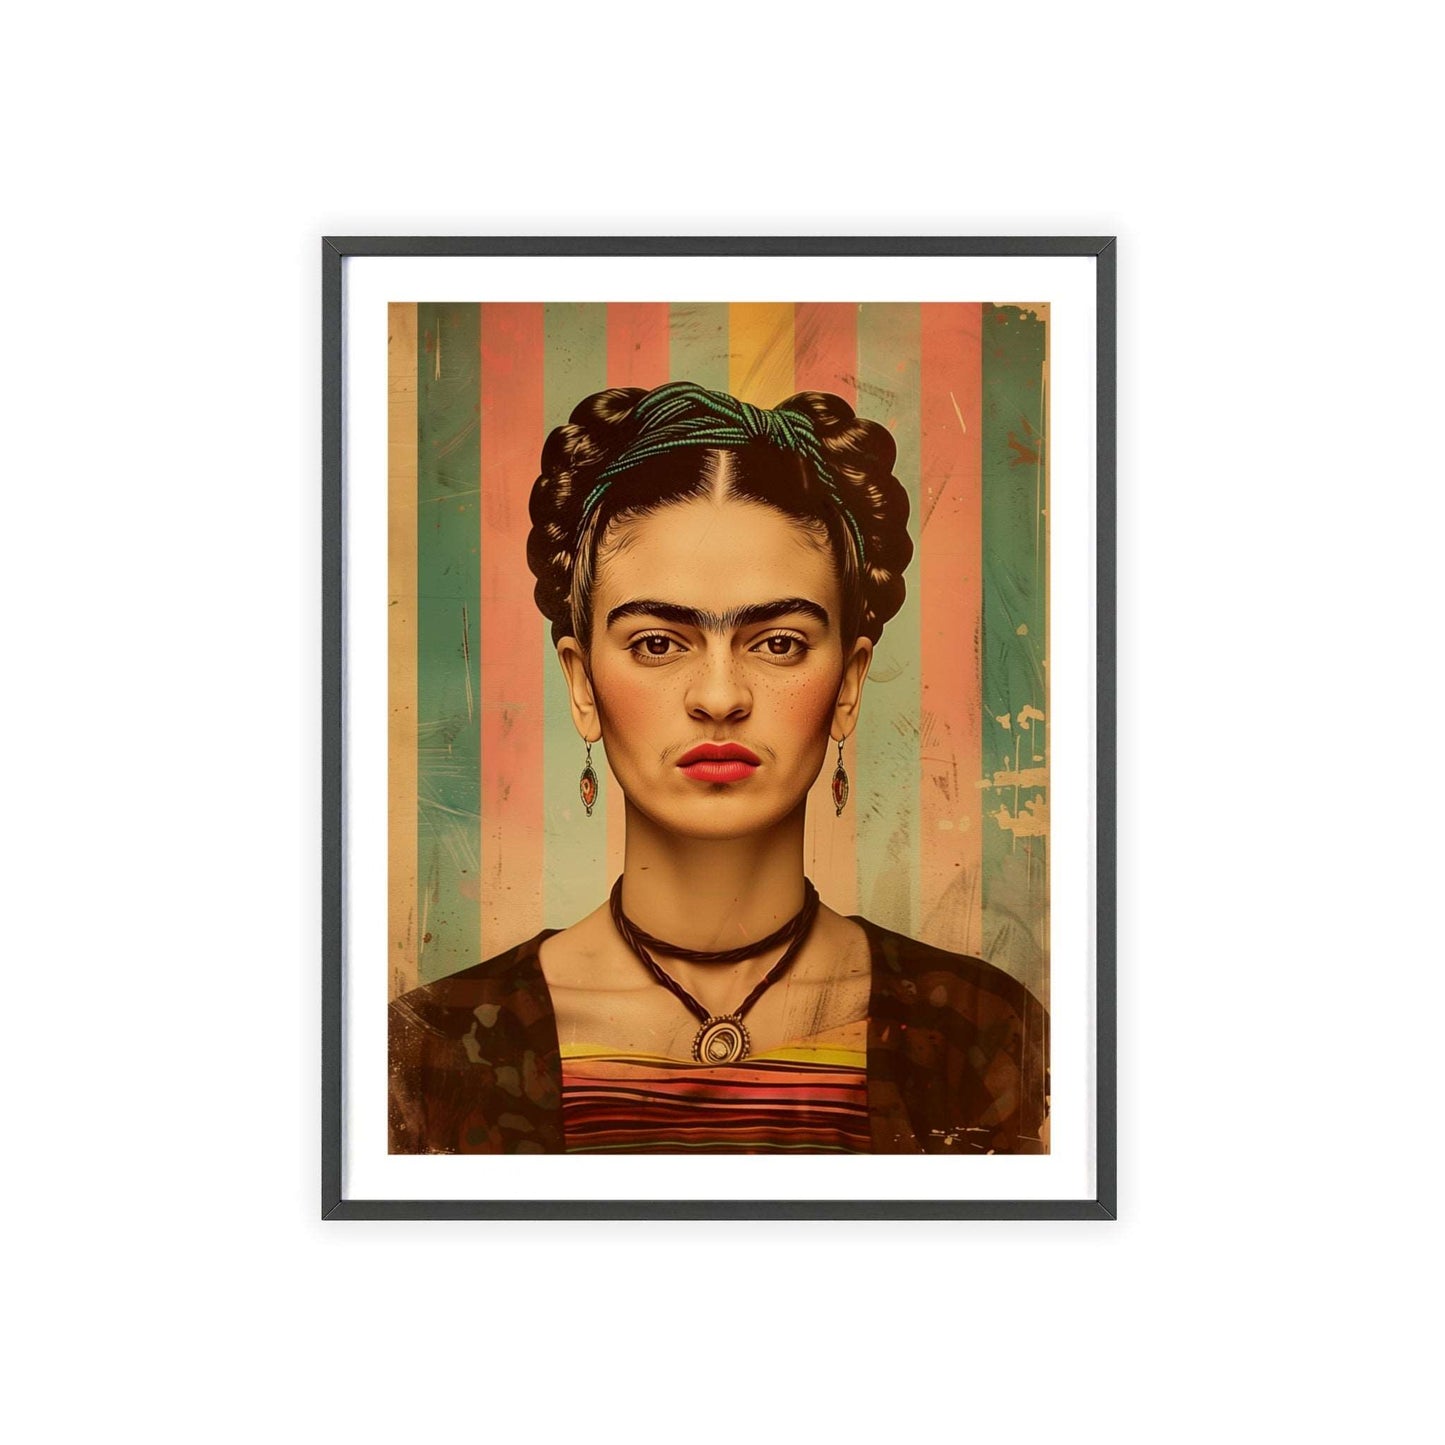 Vintage pop art style poster featuring Frida Kahlo in a vibrant color scheme. Frida has her signature unibrow, set against a background of bold, contrasting colors. The poster is framed.